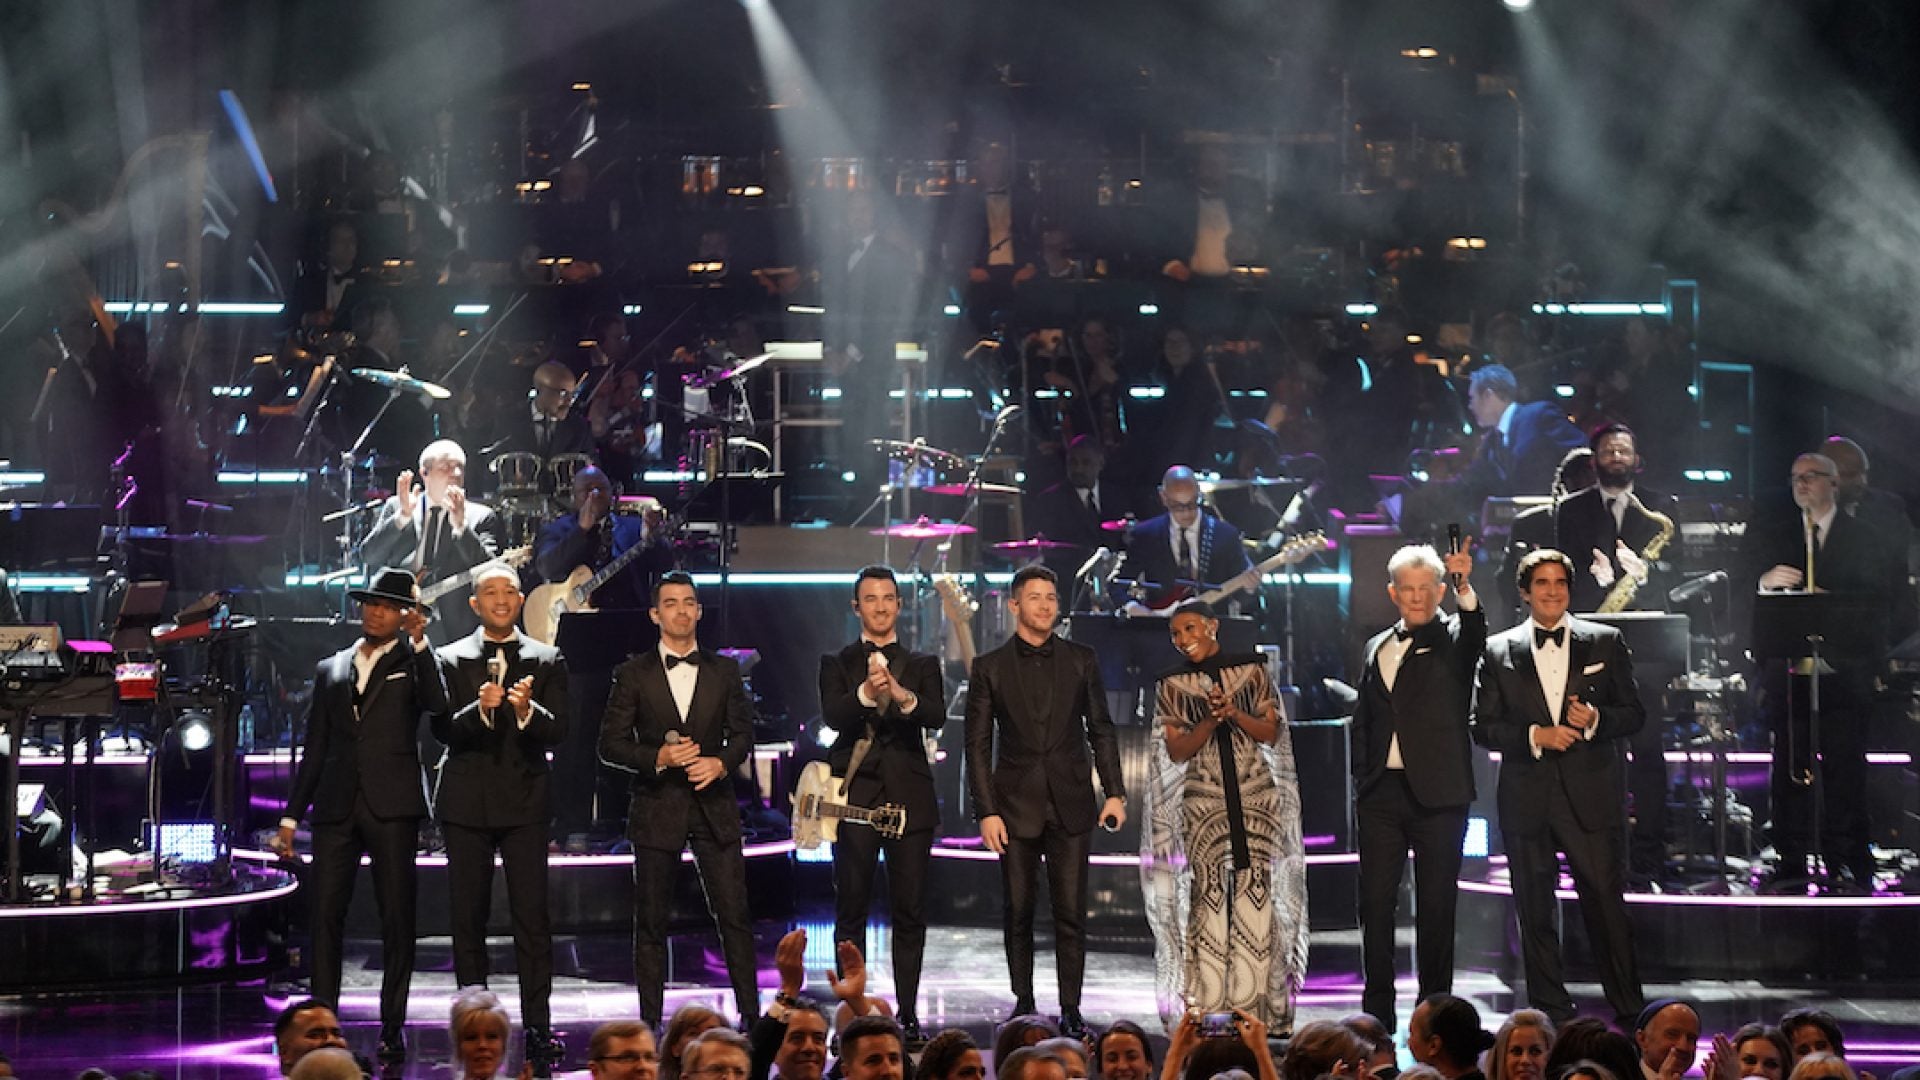 Earth, Wind & Fire's 'September' Tribute Brings Down The House At Kennedy Center Honors